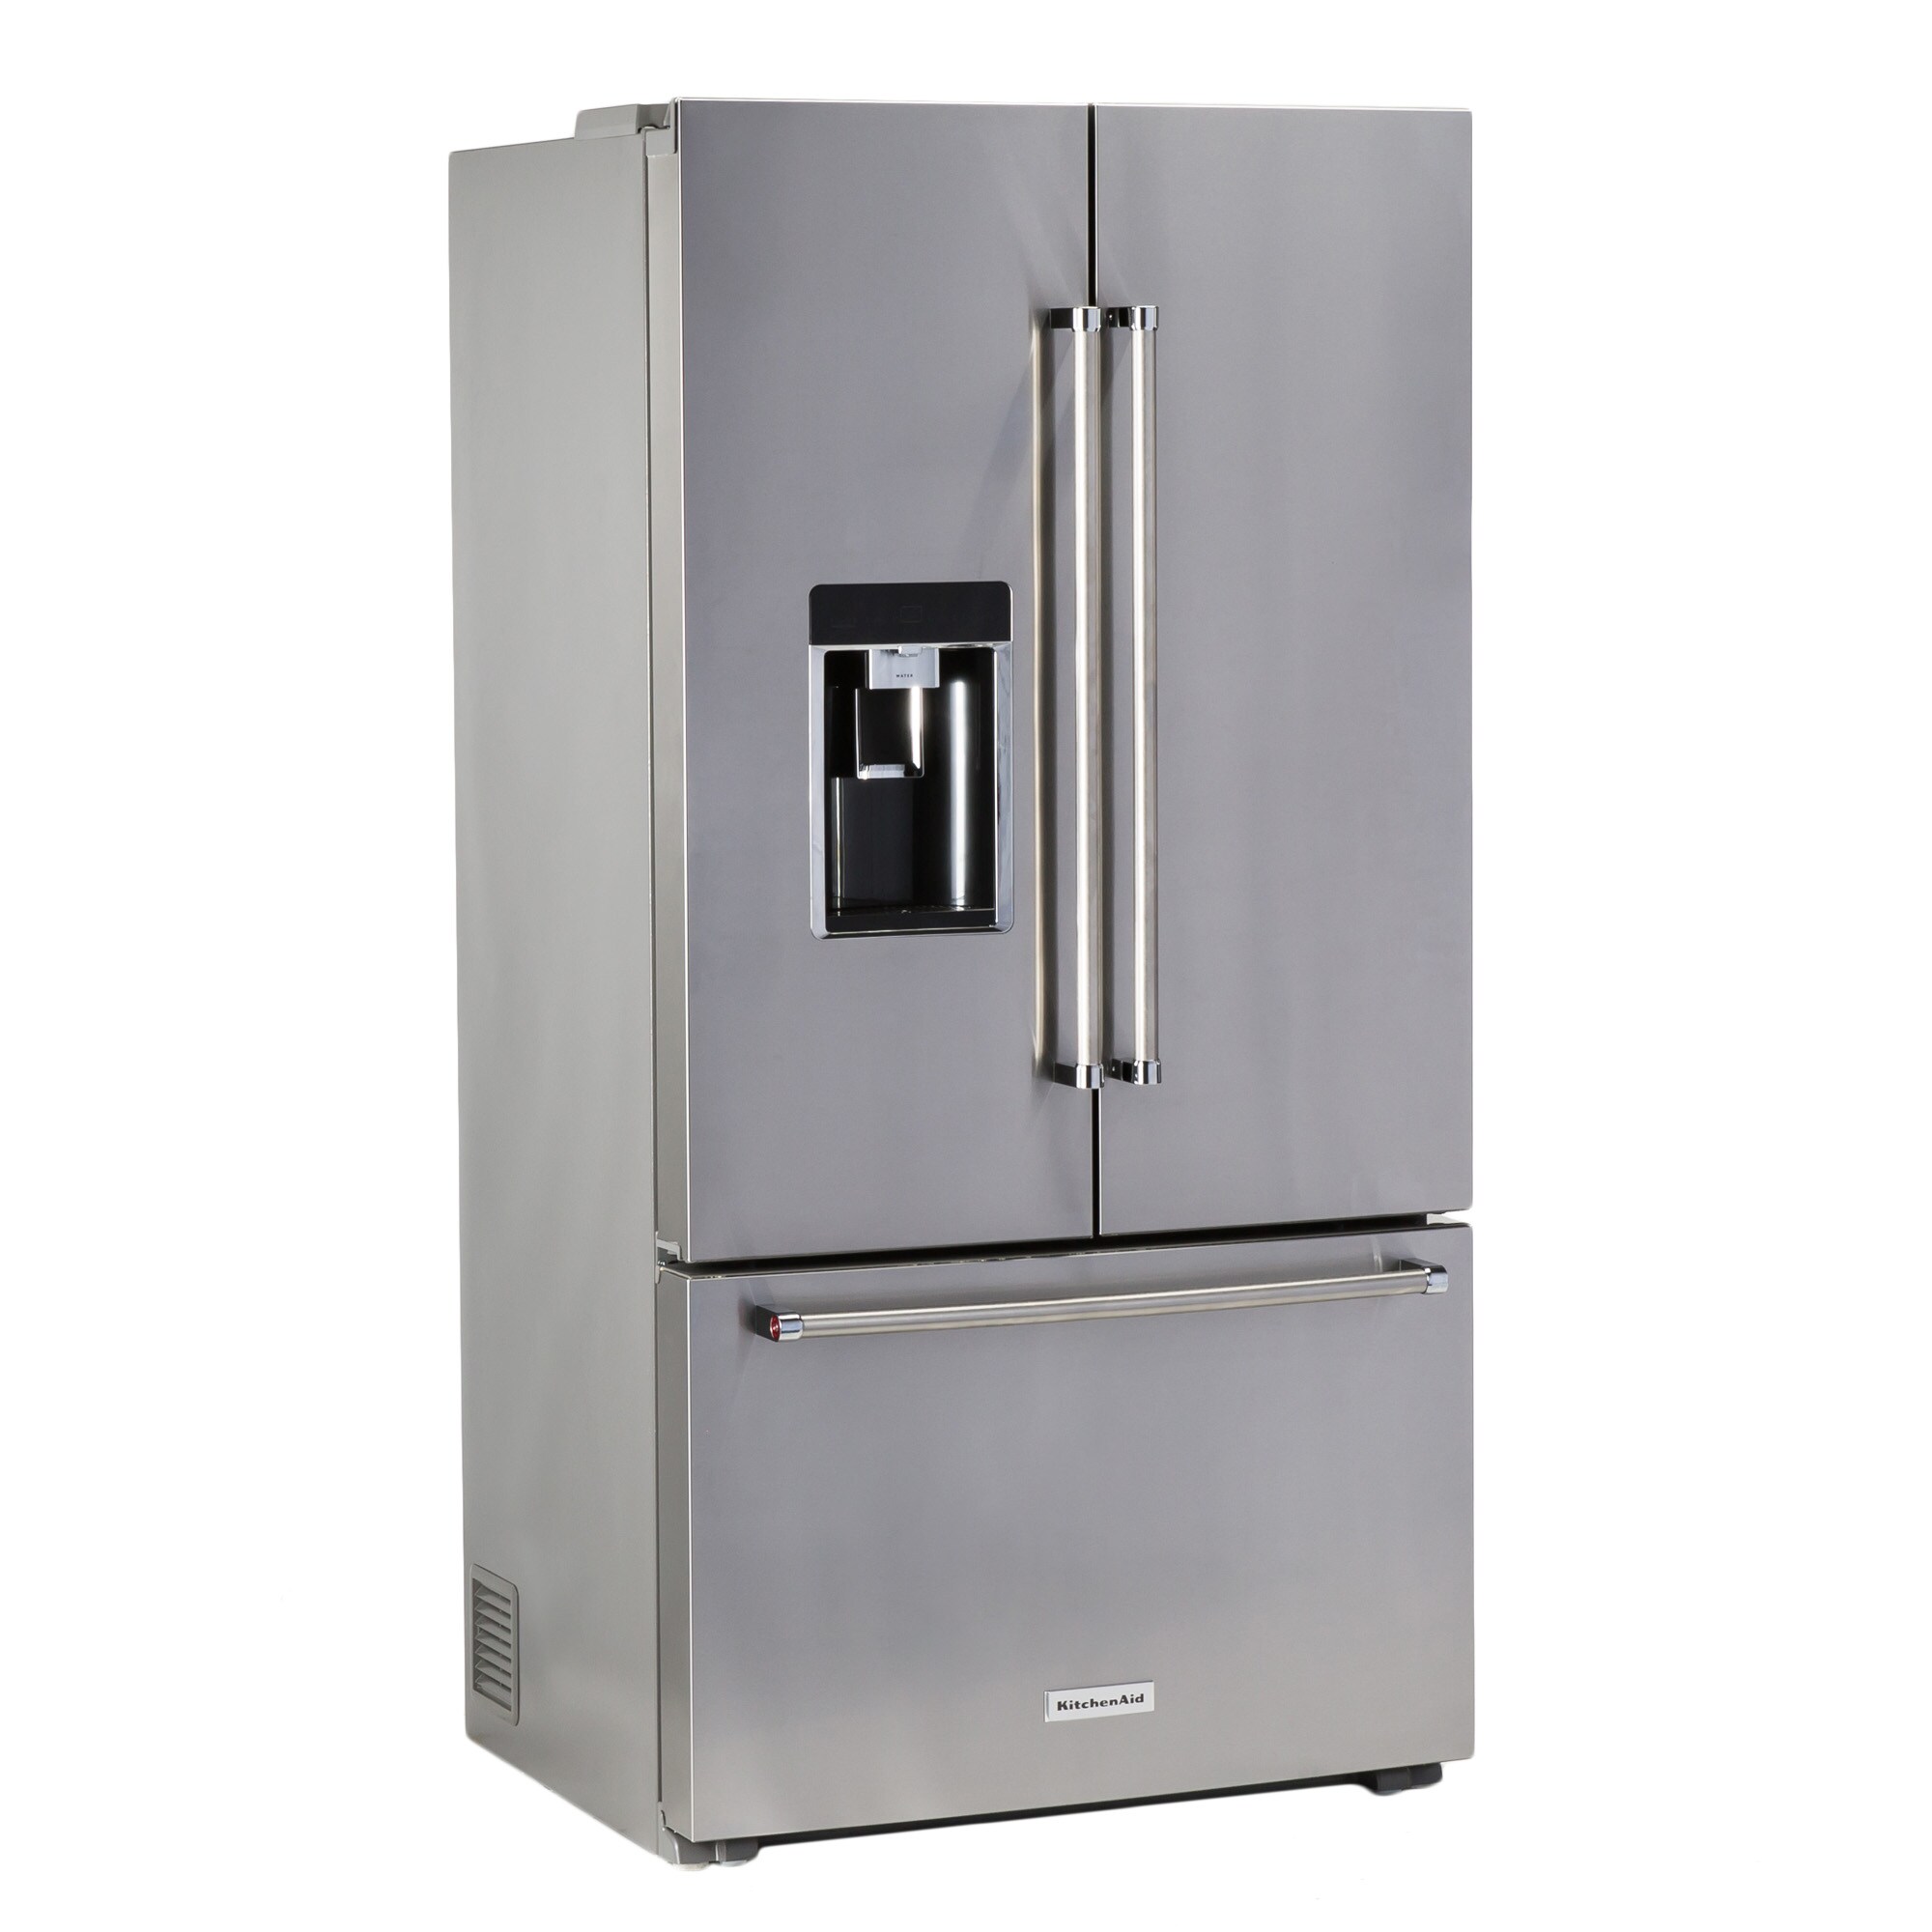 KitchenAid 23.8cu ft CounterDepth French Door Refrigerator with Ice